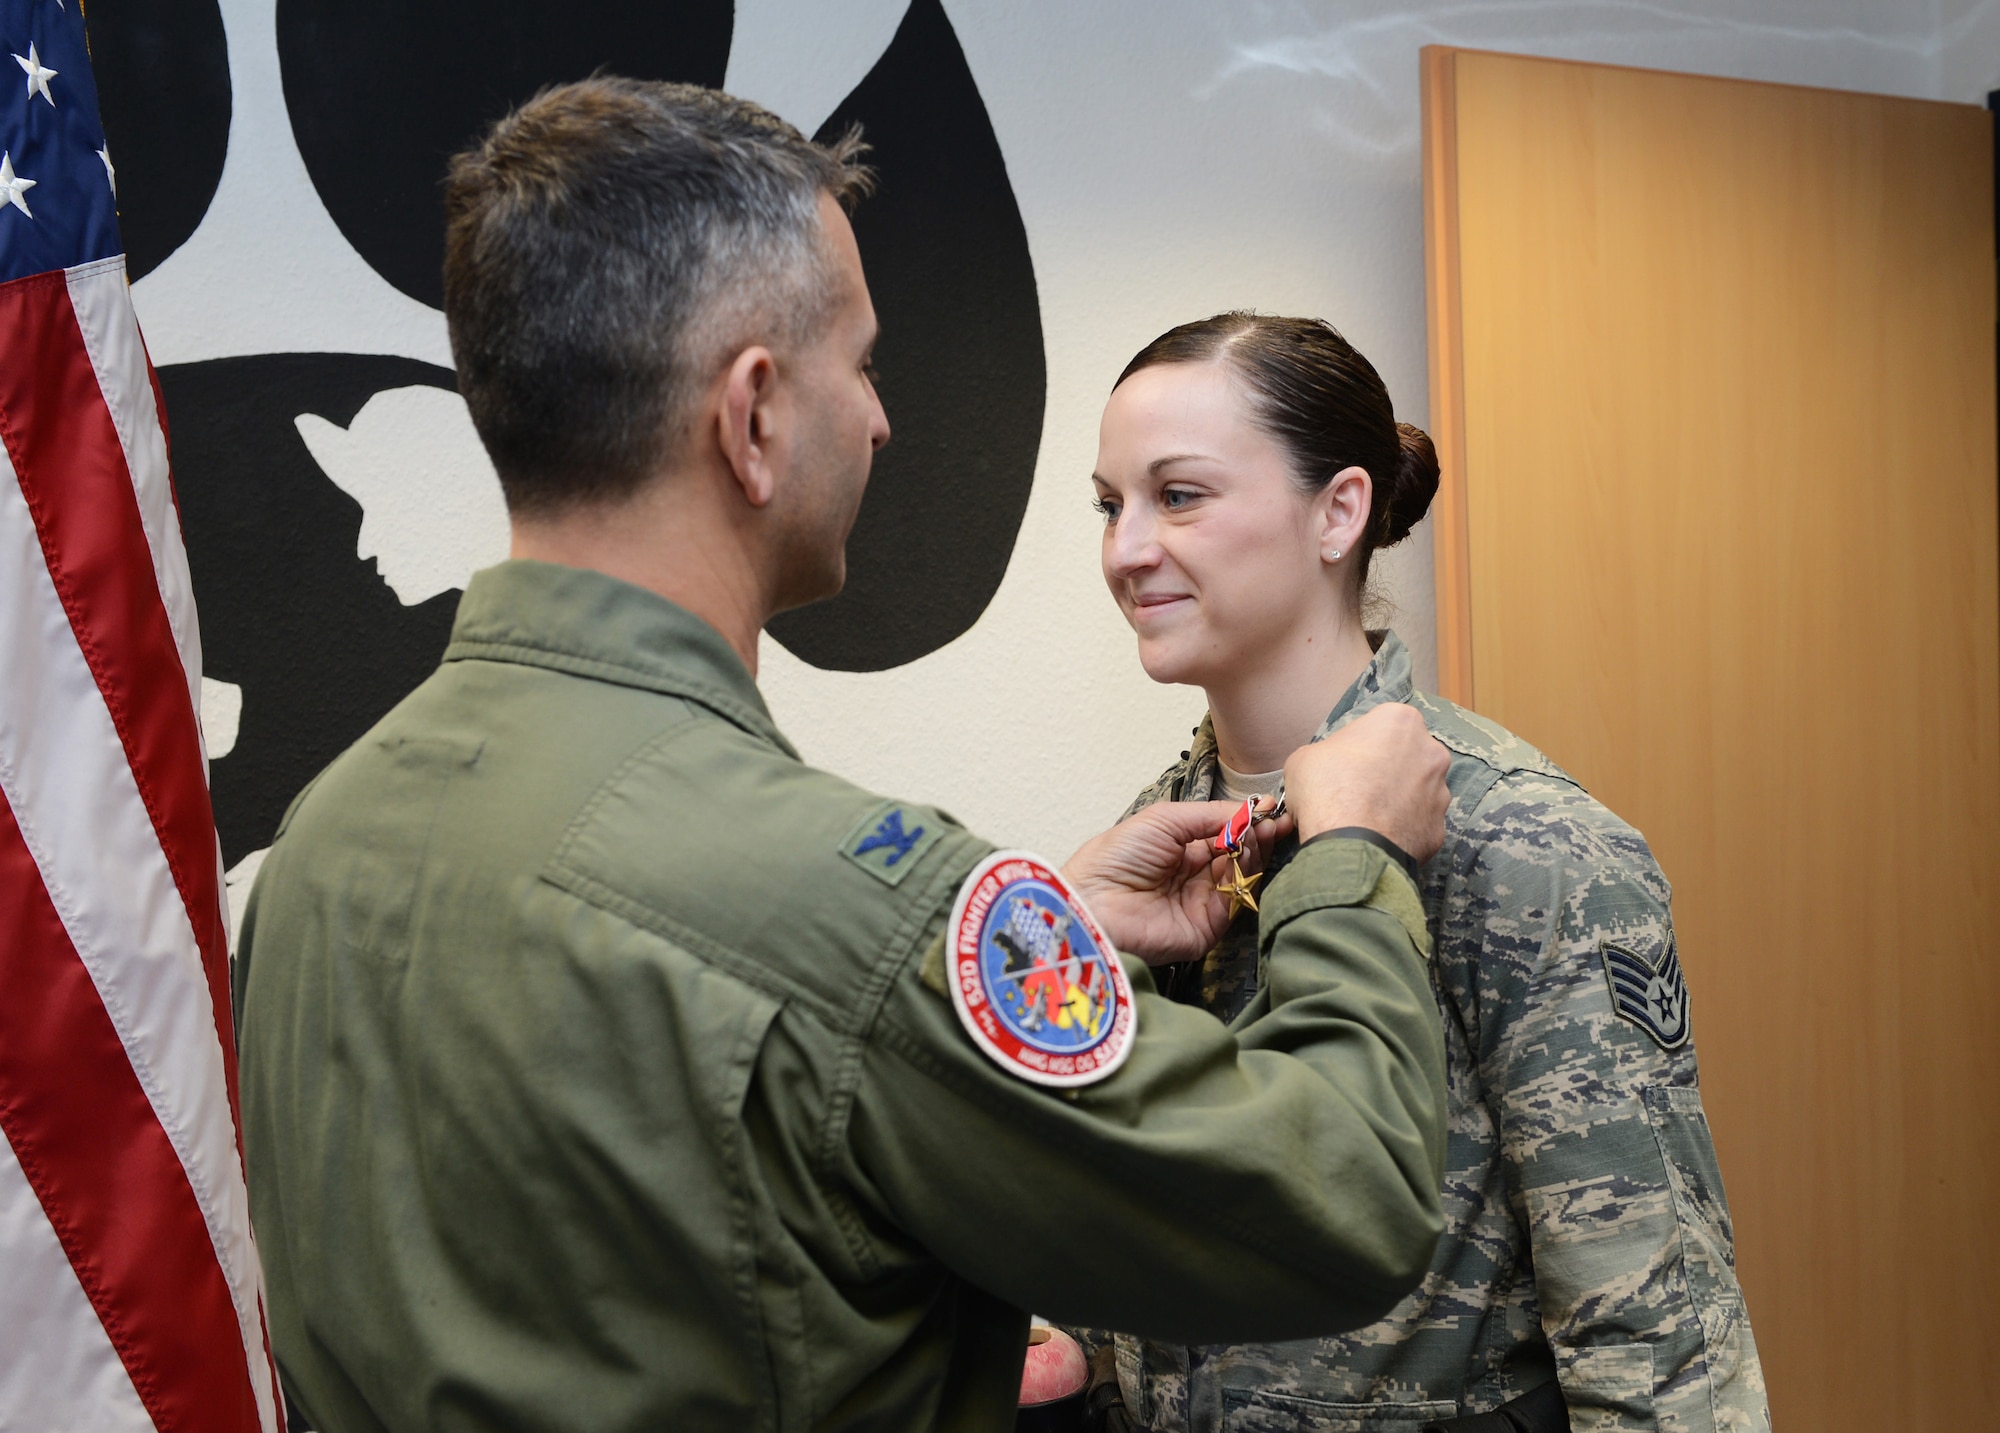 U.S. Air Force Col. David Julazadeh, 52nd Fighter Wing commander, presents a Bronze Star to Staff Sgt. Shannon Hennessy, 52nd Security Forces Squadron military working dog handler, at the MWD kennel on Spangdahlem Air Base, Germany, Feb. 27, 2014. Hennessy and her MWD "Katya" recently returned from a six-month deployment with the Combined Joint Special Operations Task Force in Afghanistan. (U.S. Air Force photo by Staff Sgt. Chad Warren/released)